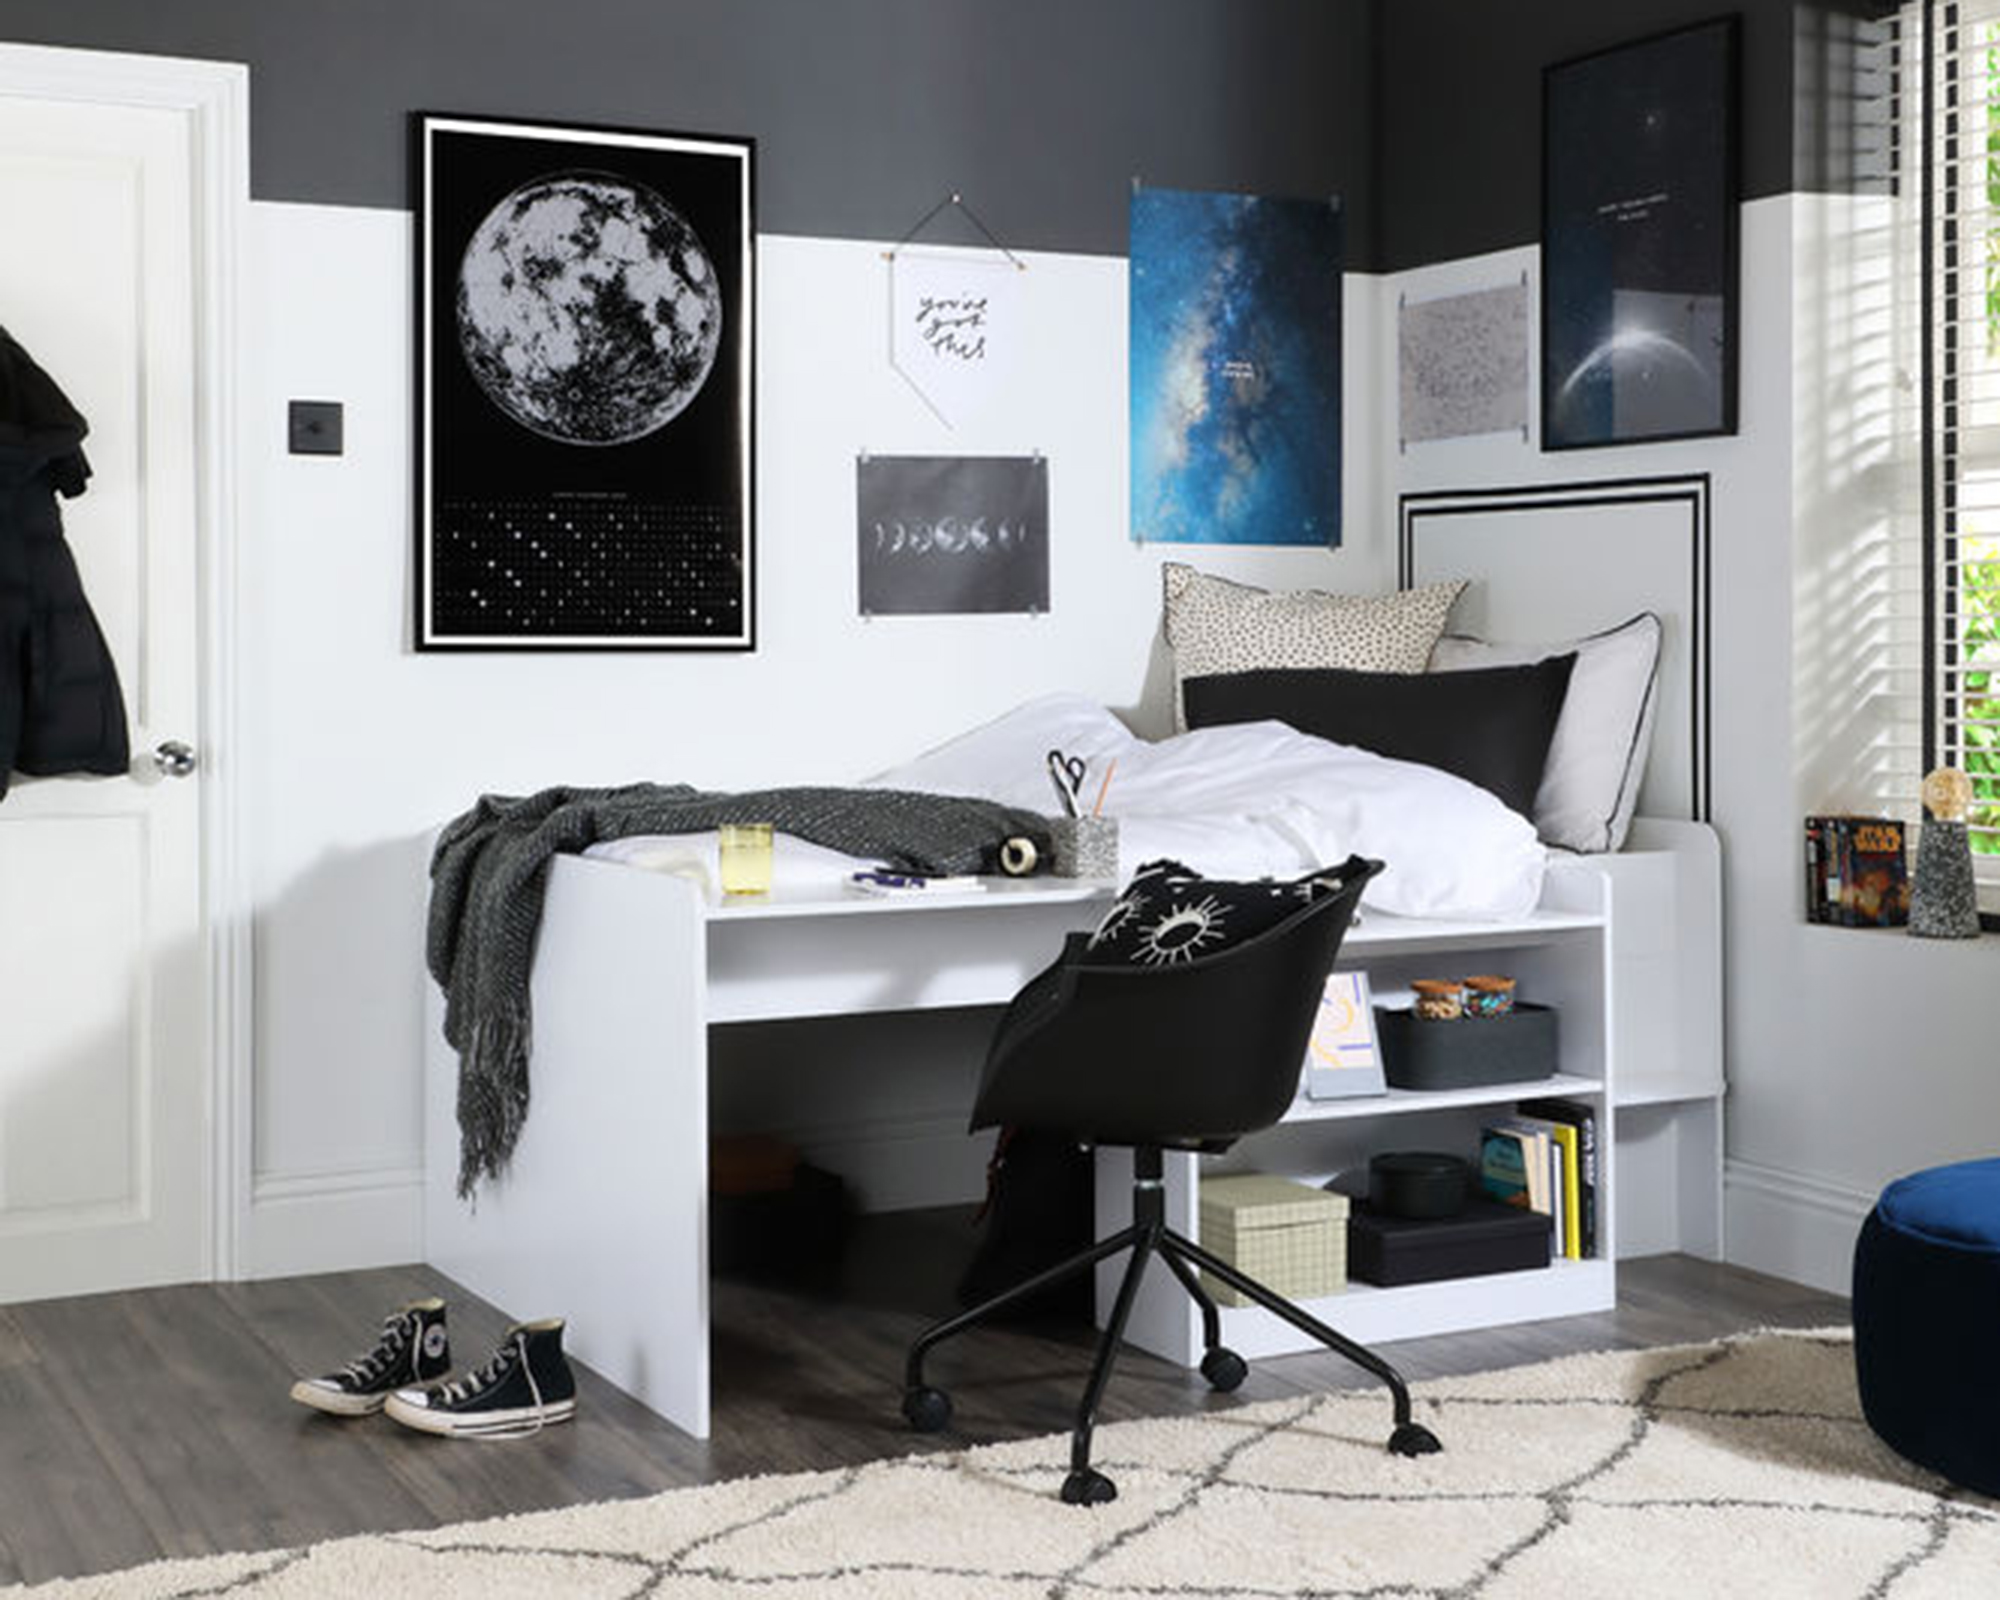 Space themed boys bedroom design by Furniture Choice